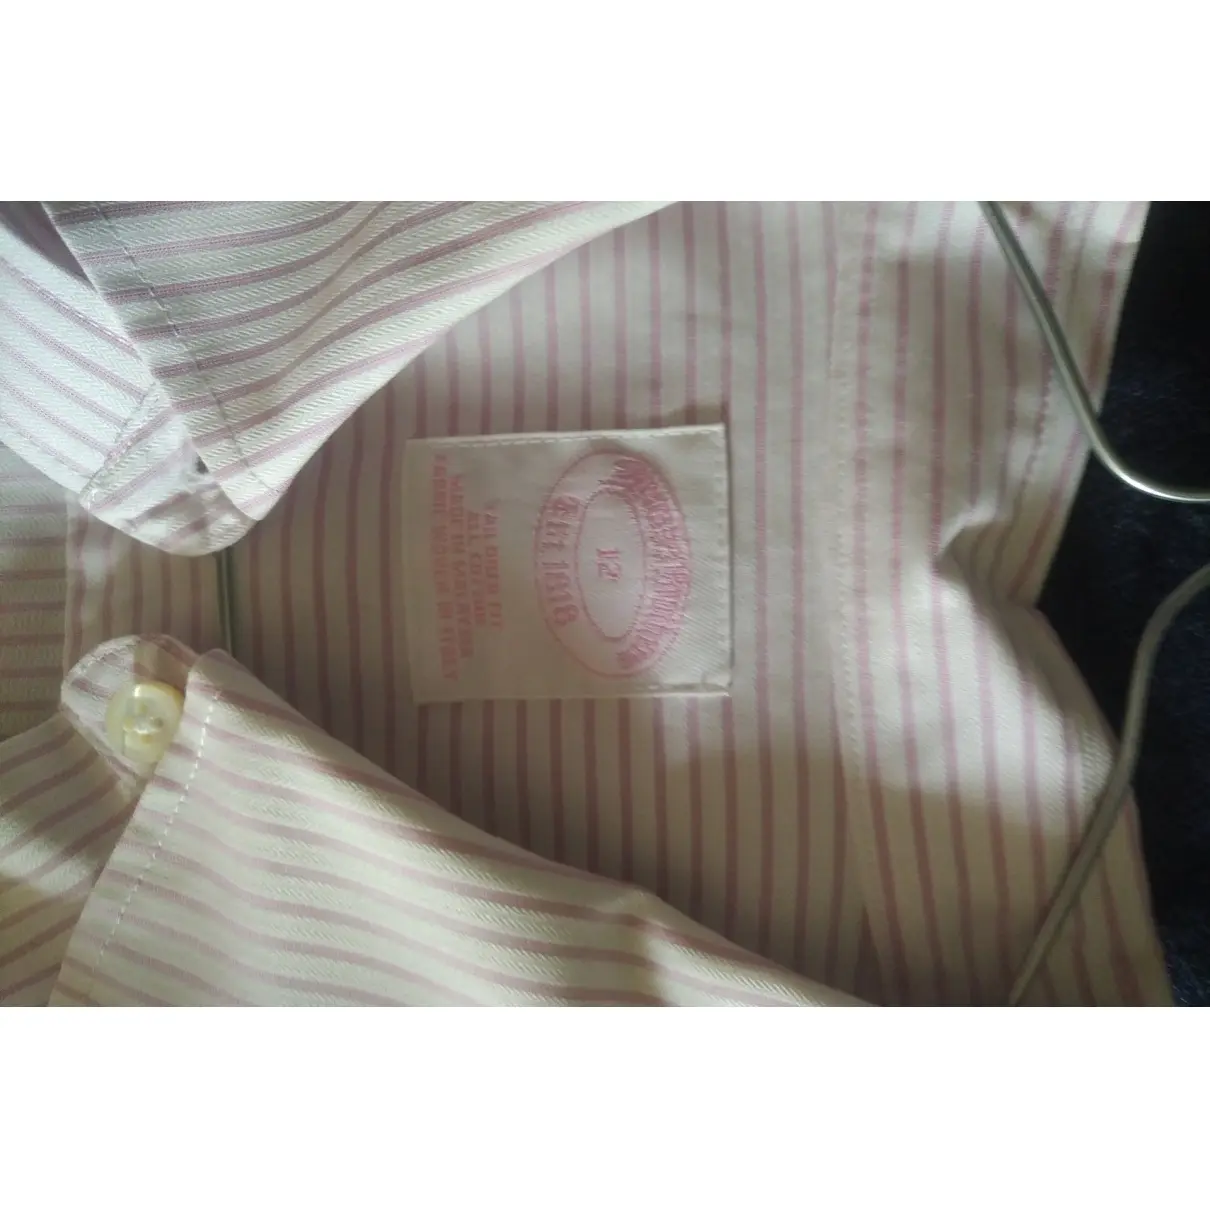 Buy Brooks Brothers Shirt online